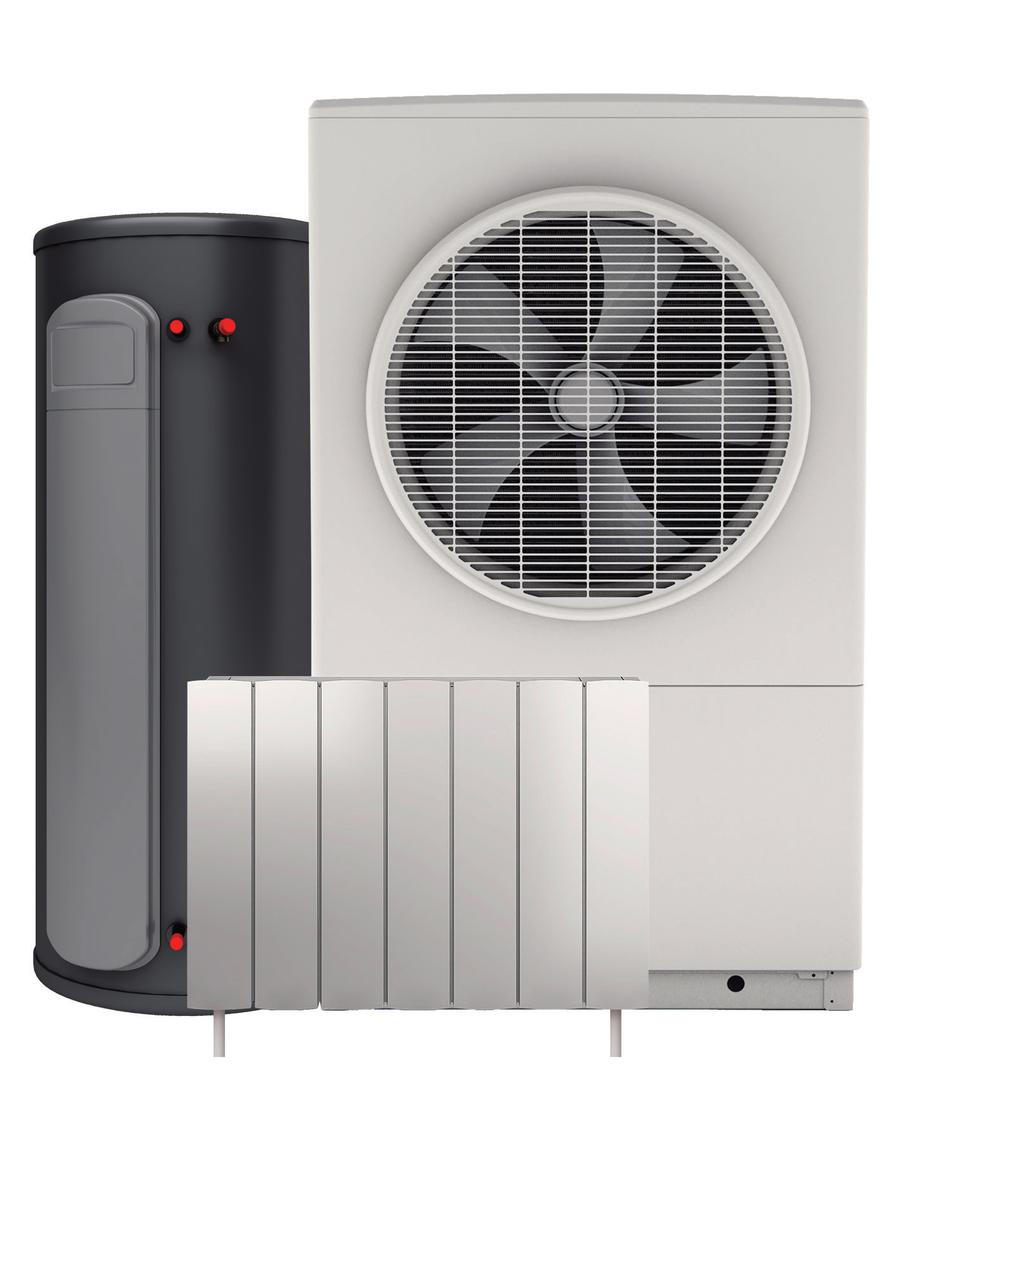 A-Class A-Rated Homes with Dimplex heat pumps